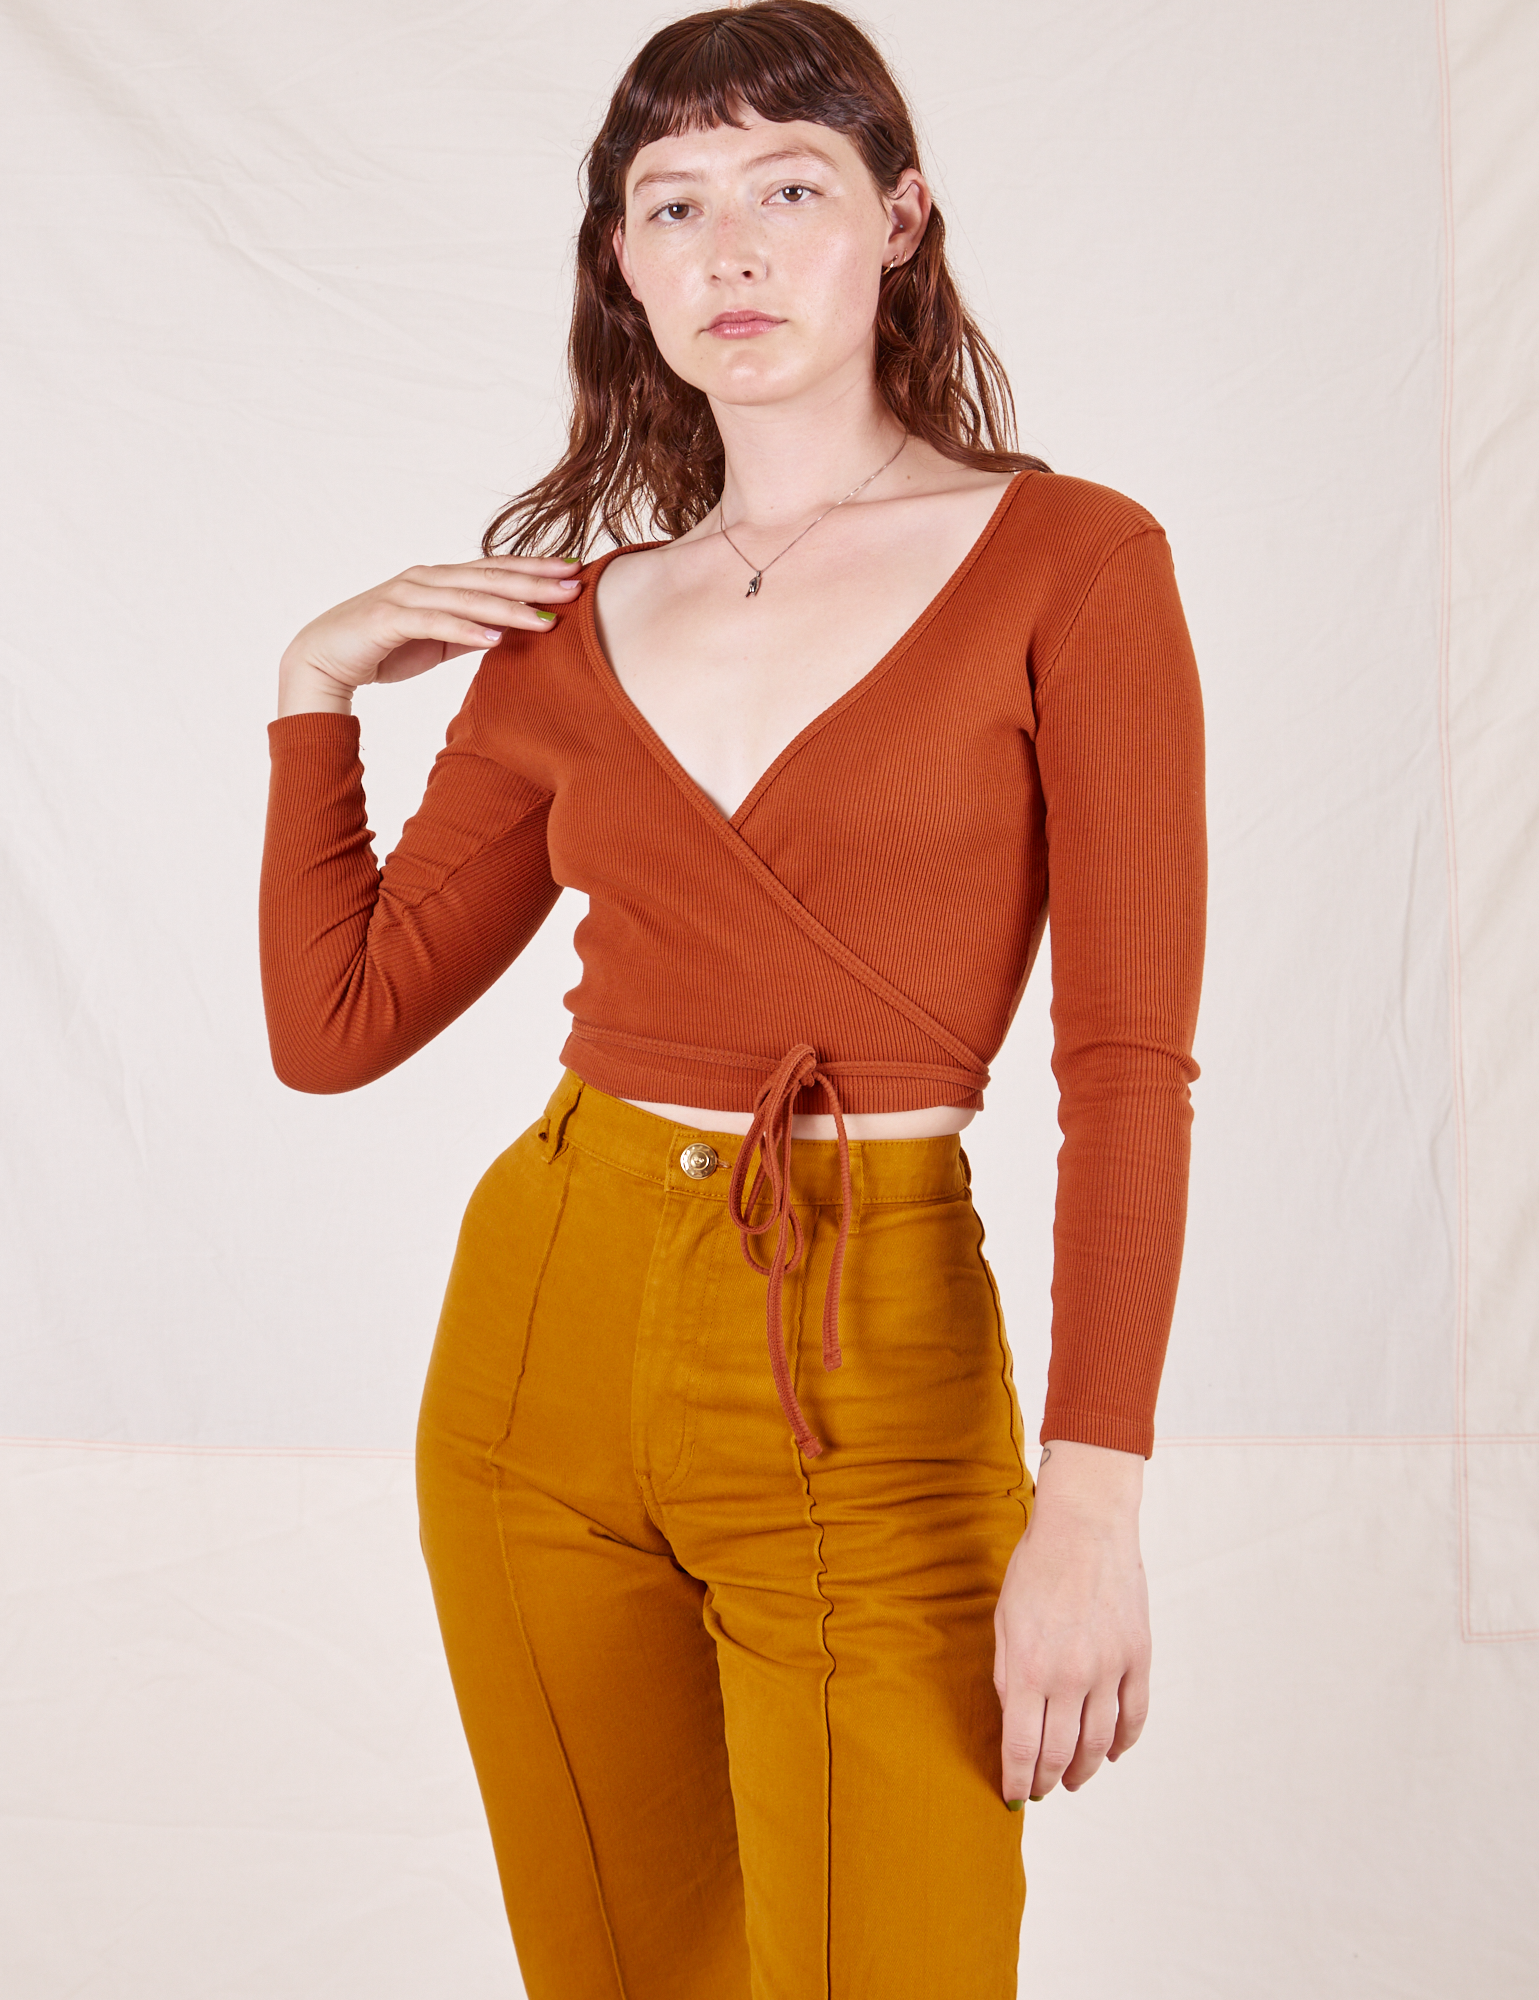 Alex is wearing size 1 Wrap Top in Burnt Terracotta paired with spicy mustard Western Pants